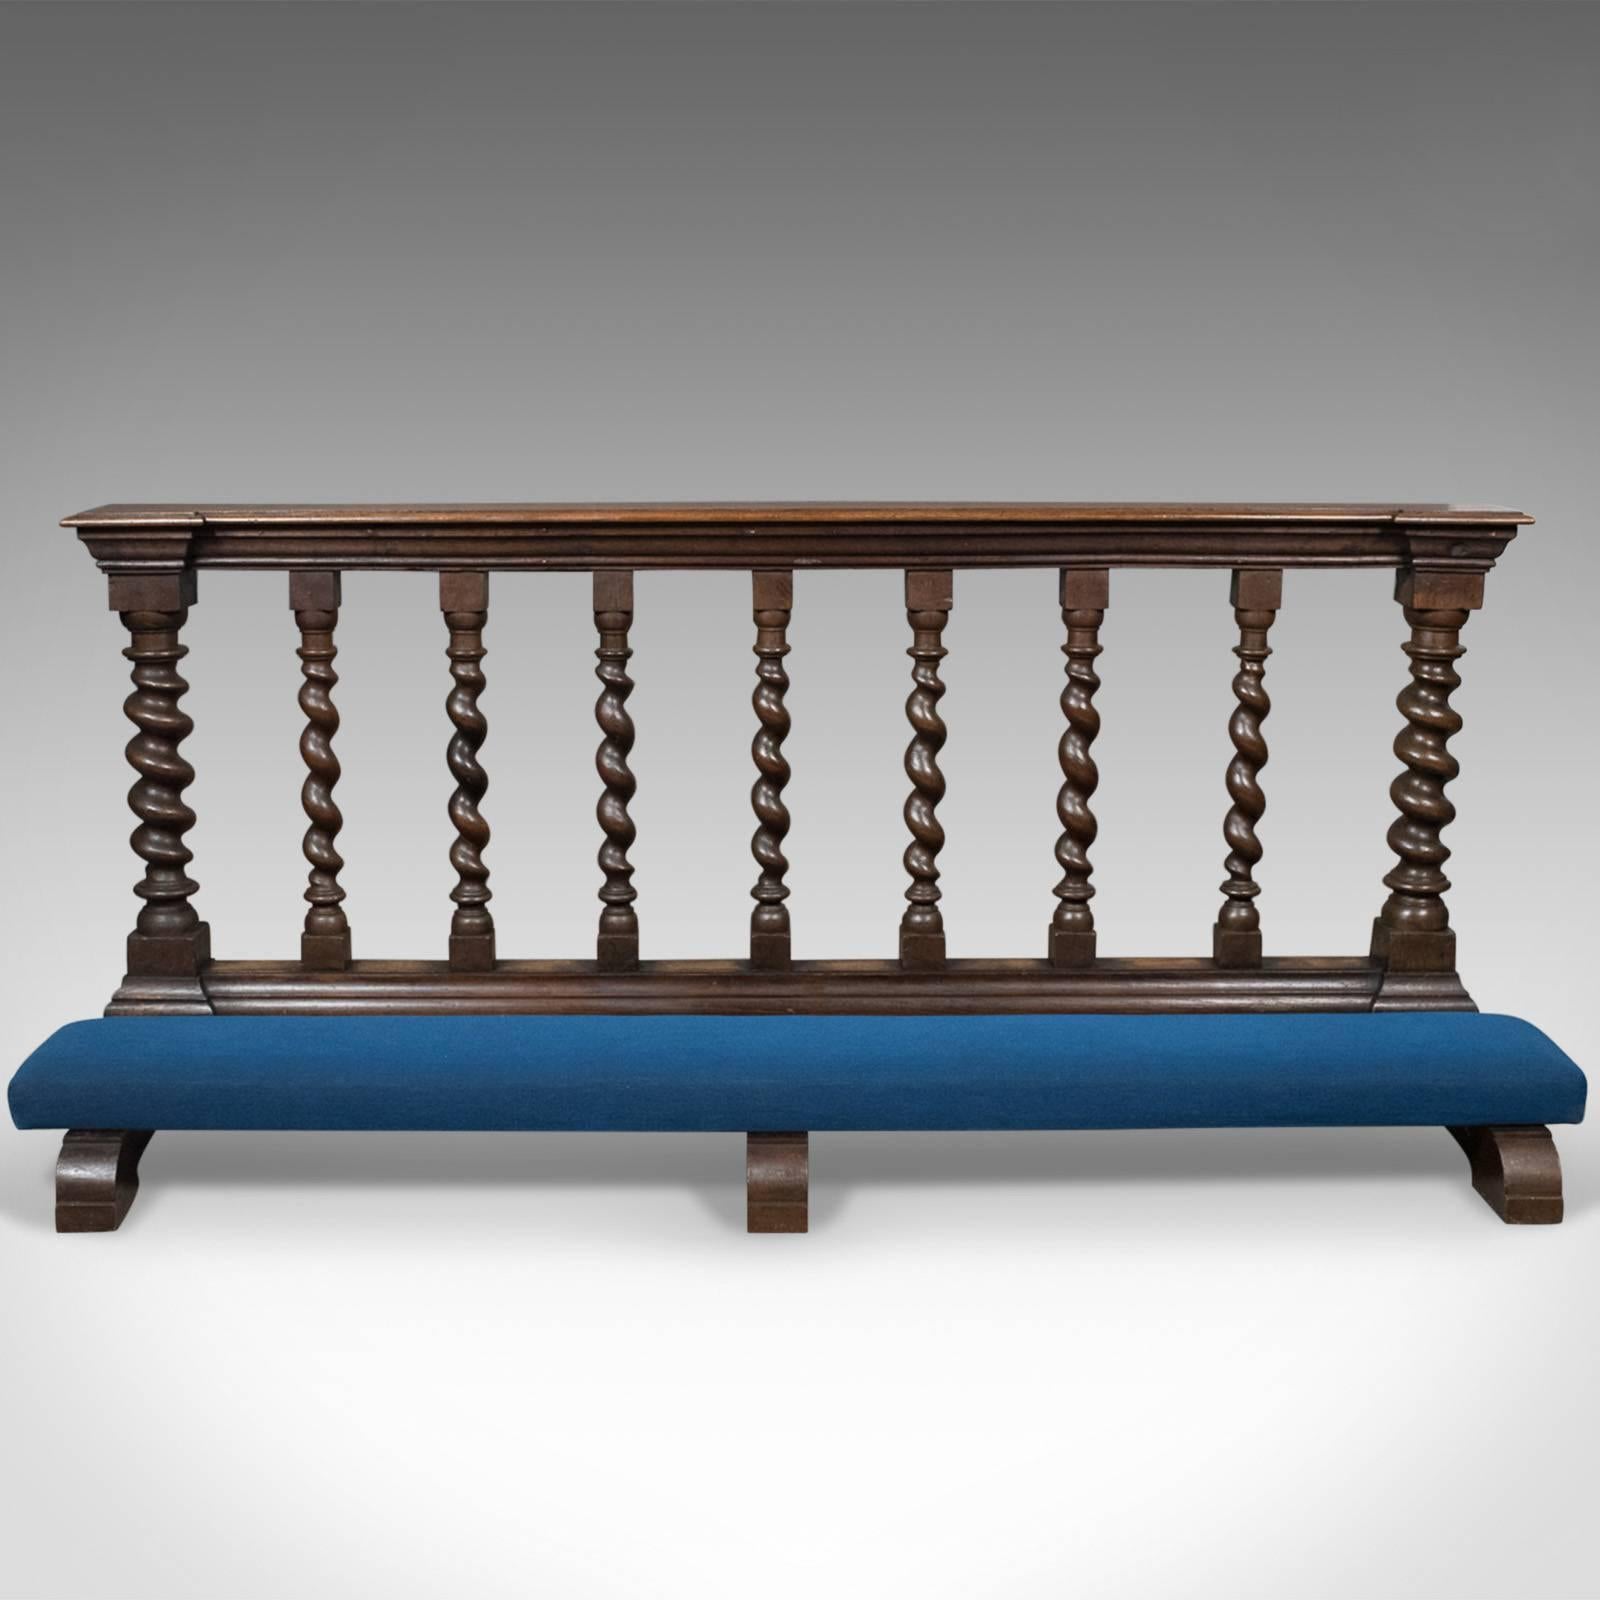 This is an antique communion rail in English oak dating to the Victorian period, circa 1900.

Appealing dark oak tones with desirable aged patina
Robust construction, solid and stable.

A pair of quality, stout barley twist baluster